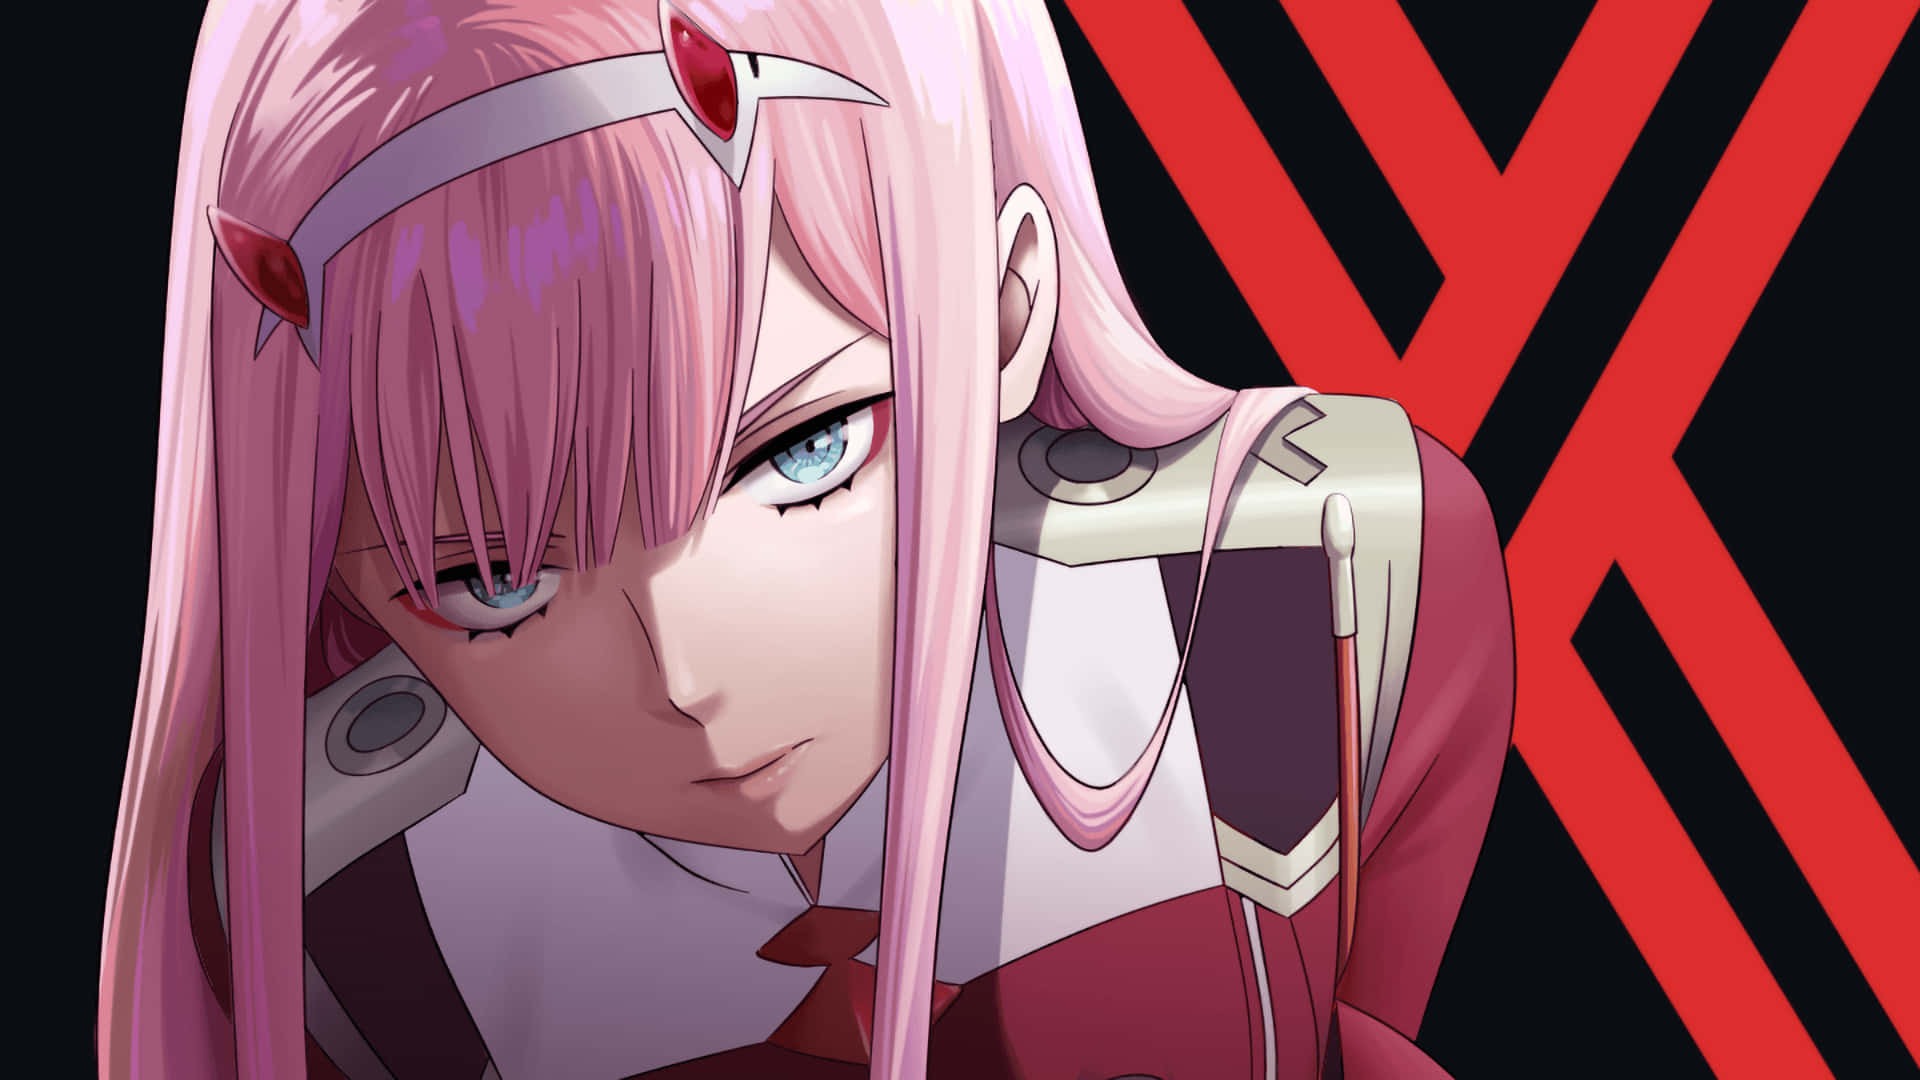 A Girl With Pink Hair And A Cross On Her Face Background